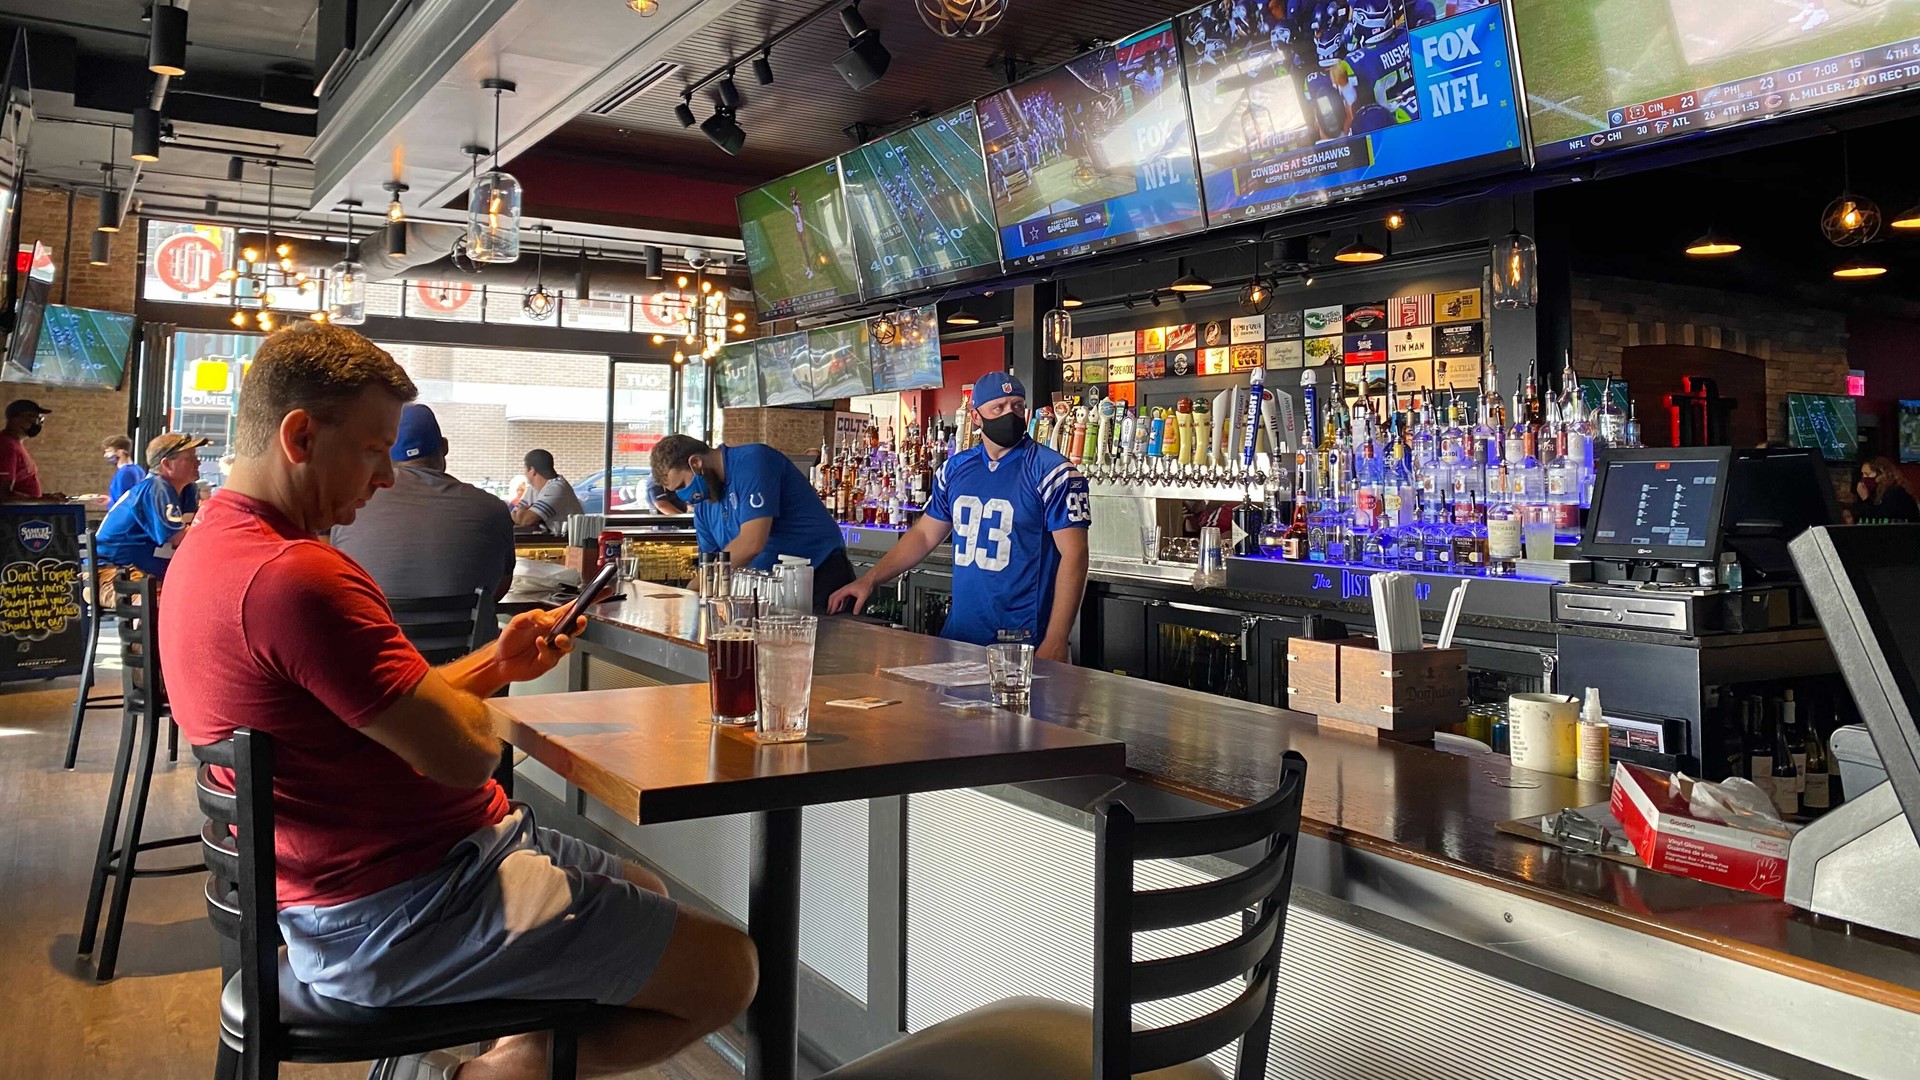 Restaurants and sports bars around Lucas Oil Stadium said it’s been a difficult season since the Colts usually bring in a lot of business.